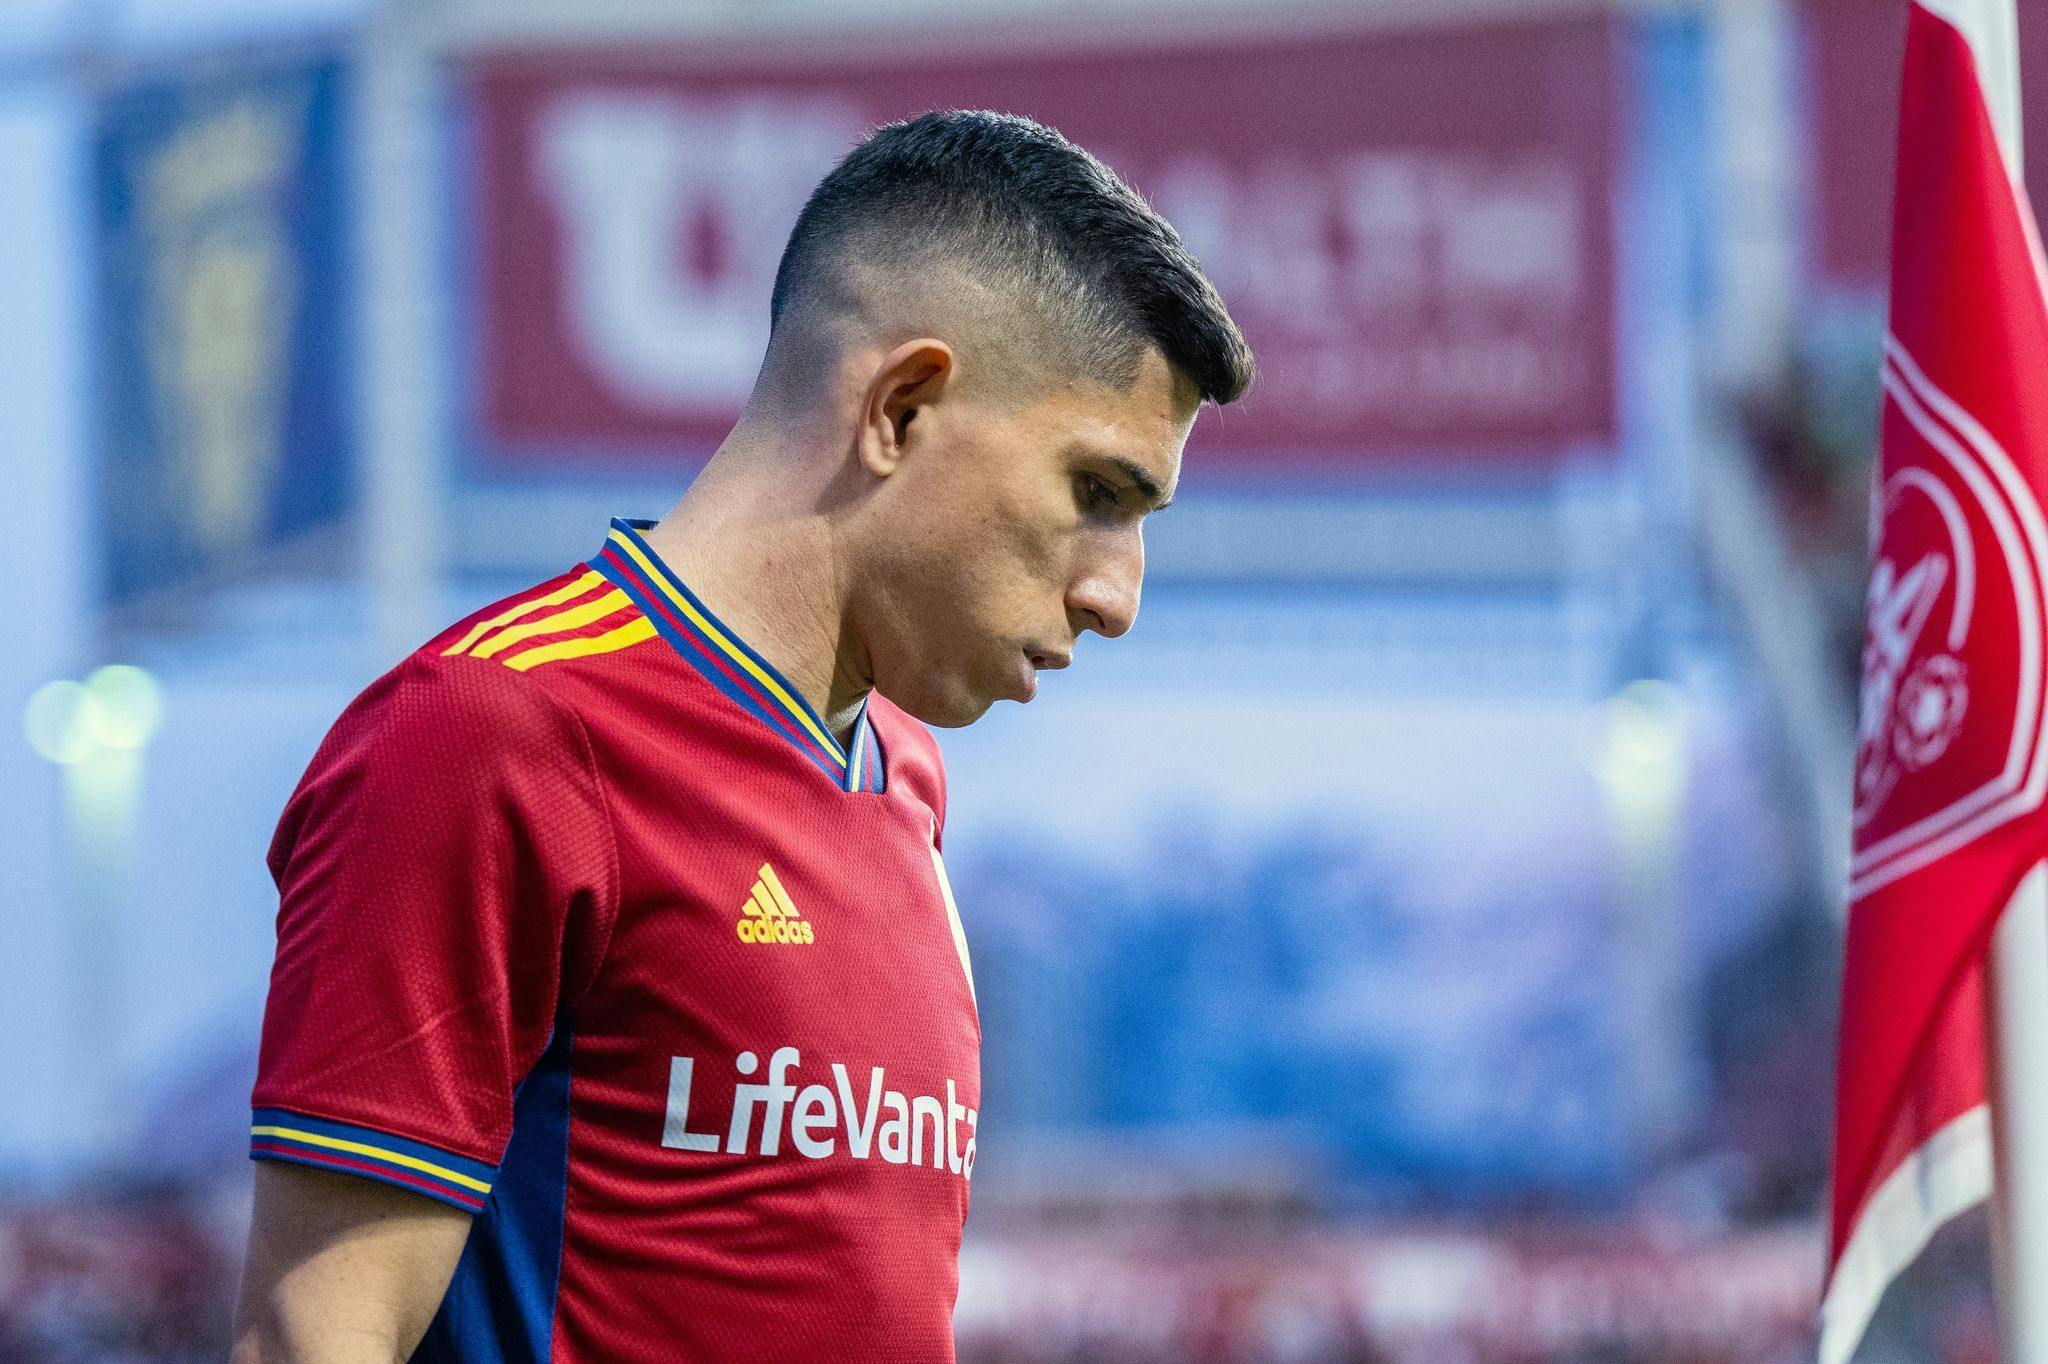 RSL vs. LAFC: Player of the Match